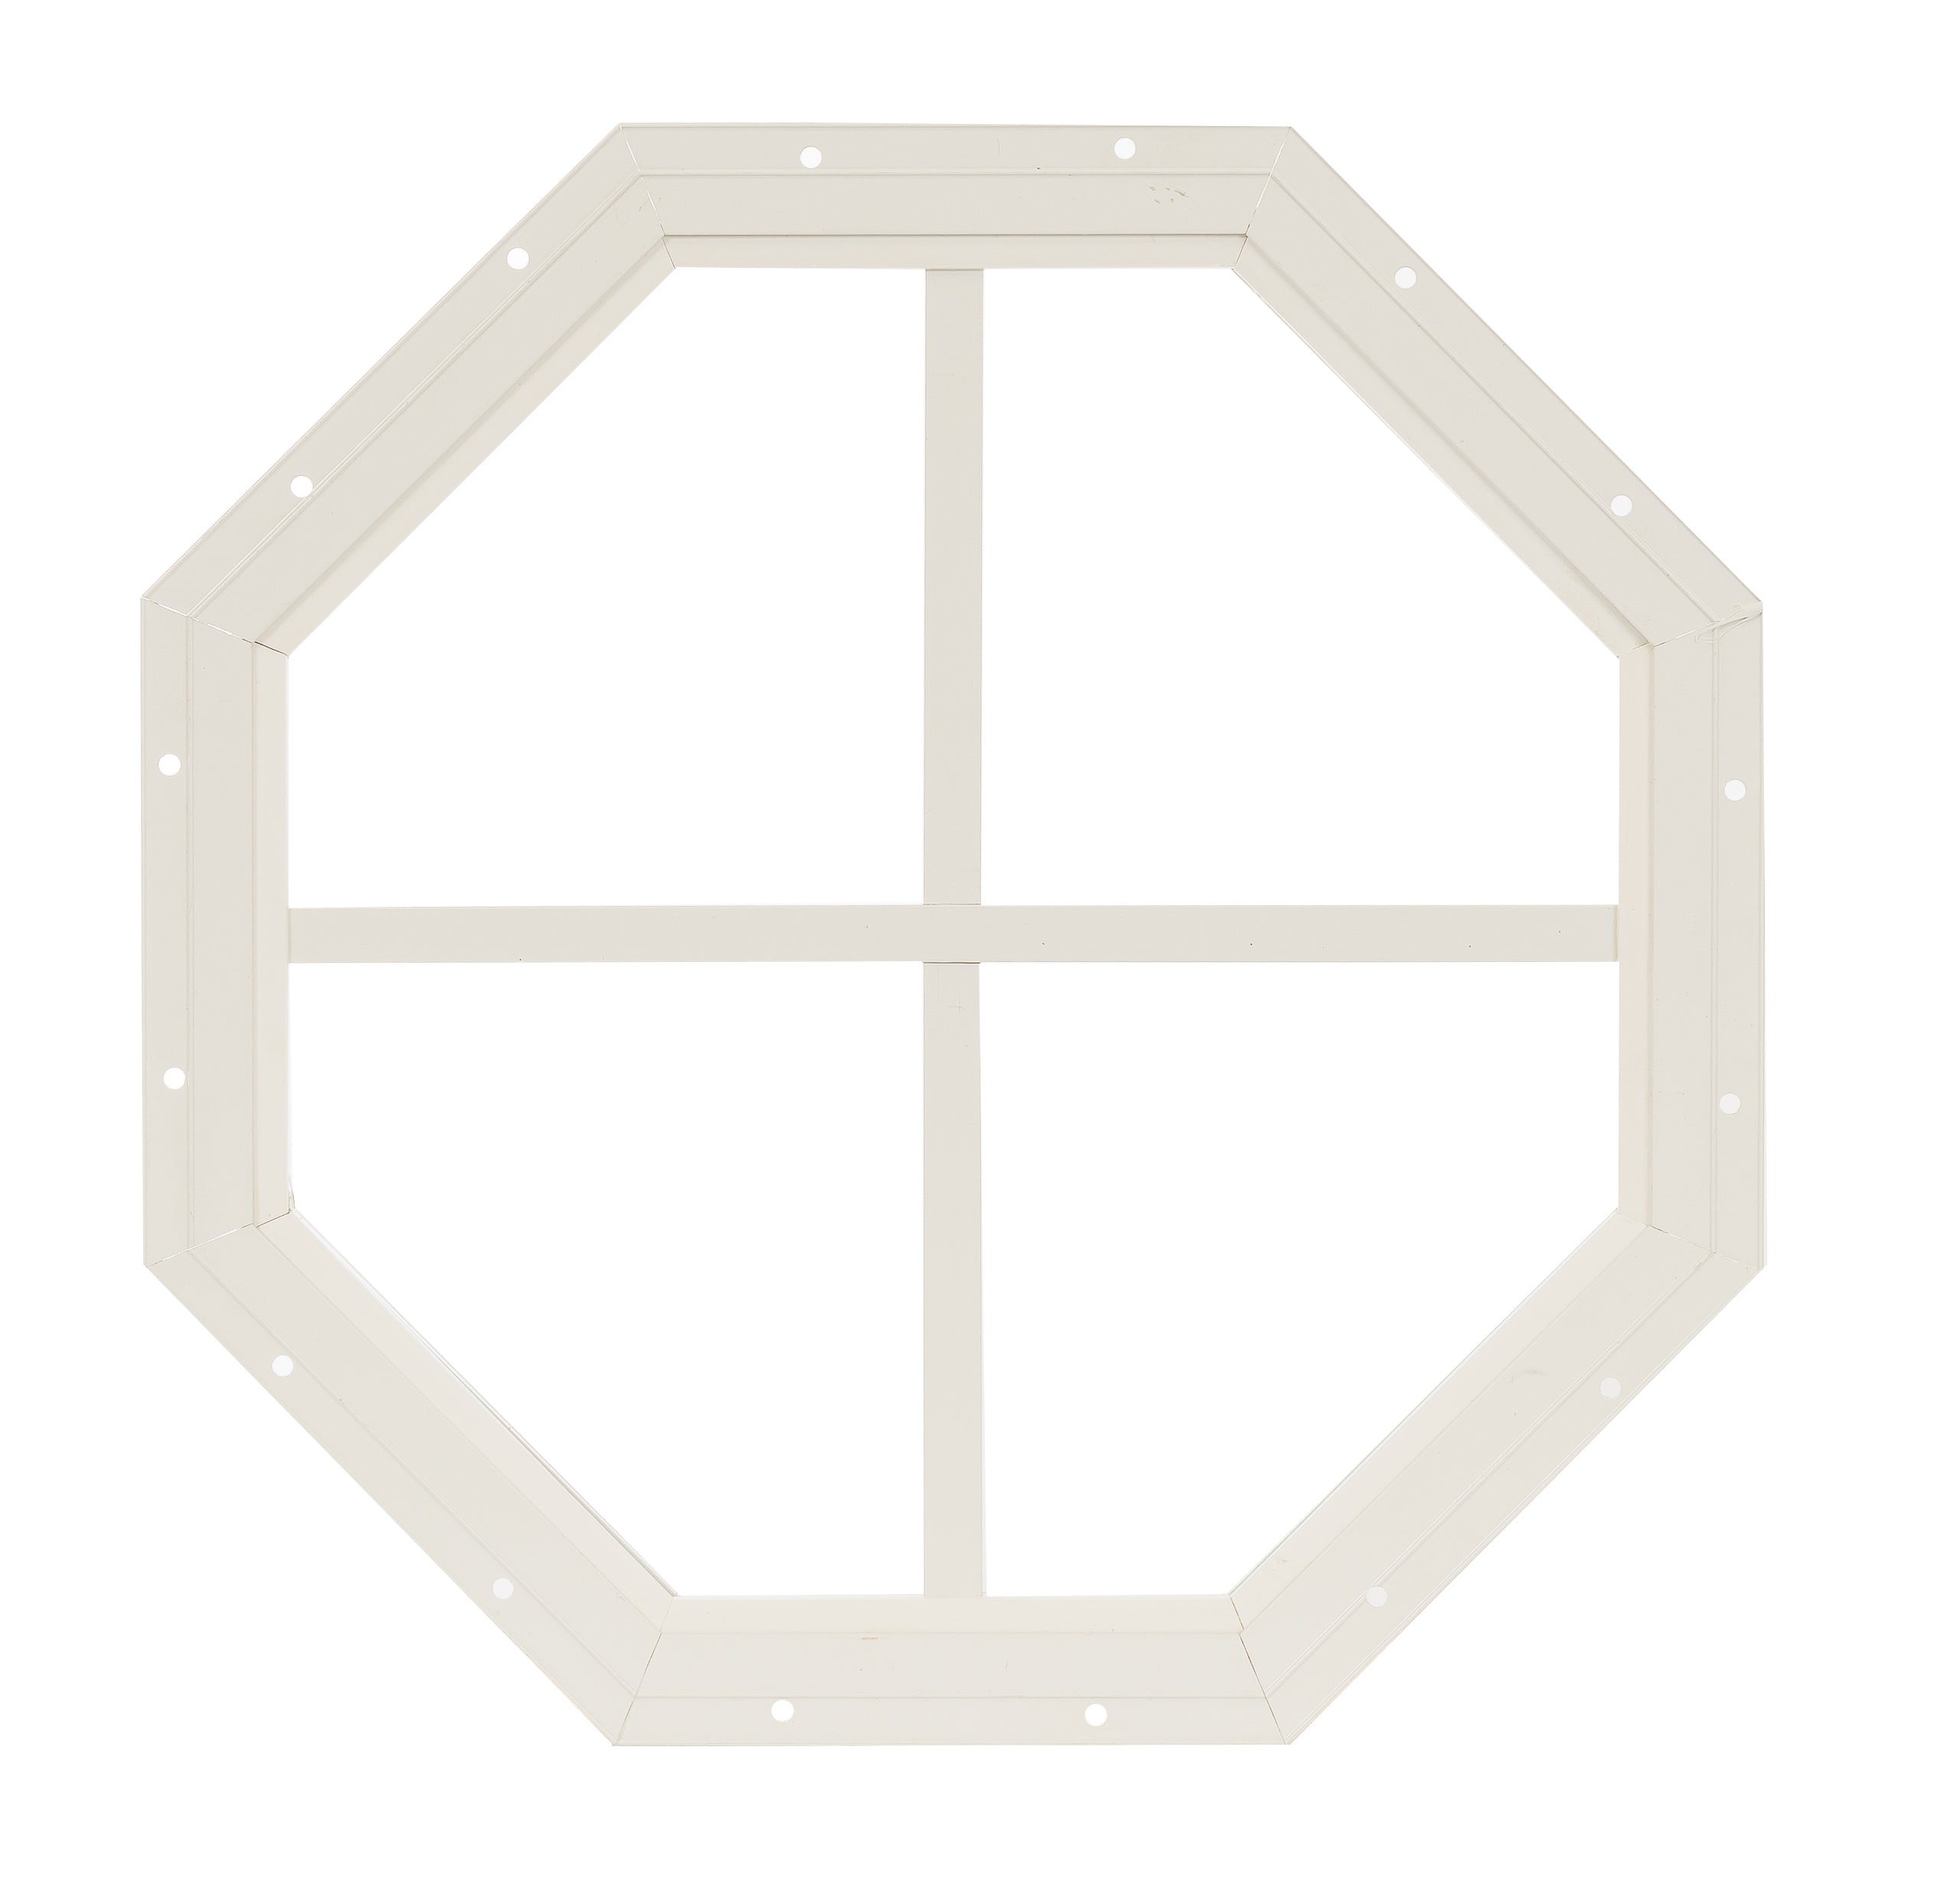 18" Octagon Gable Flush Mount White Window for Sheds, Playhouses, and MORE